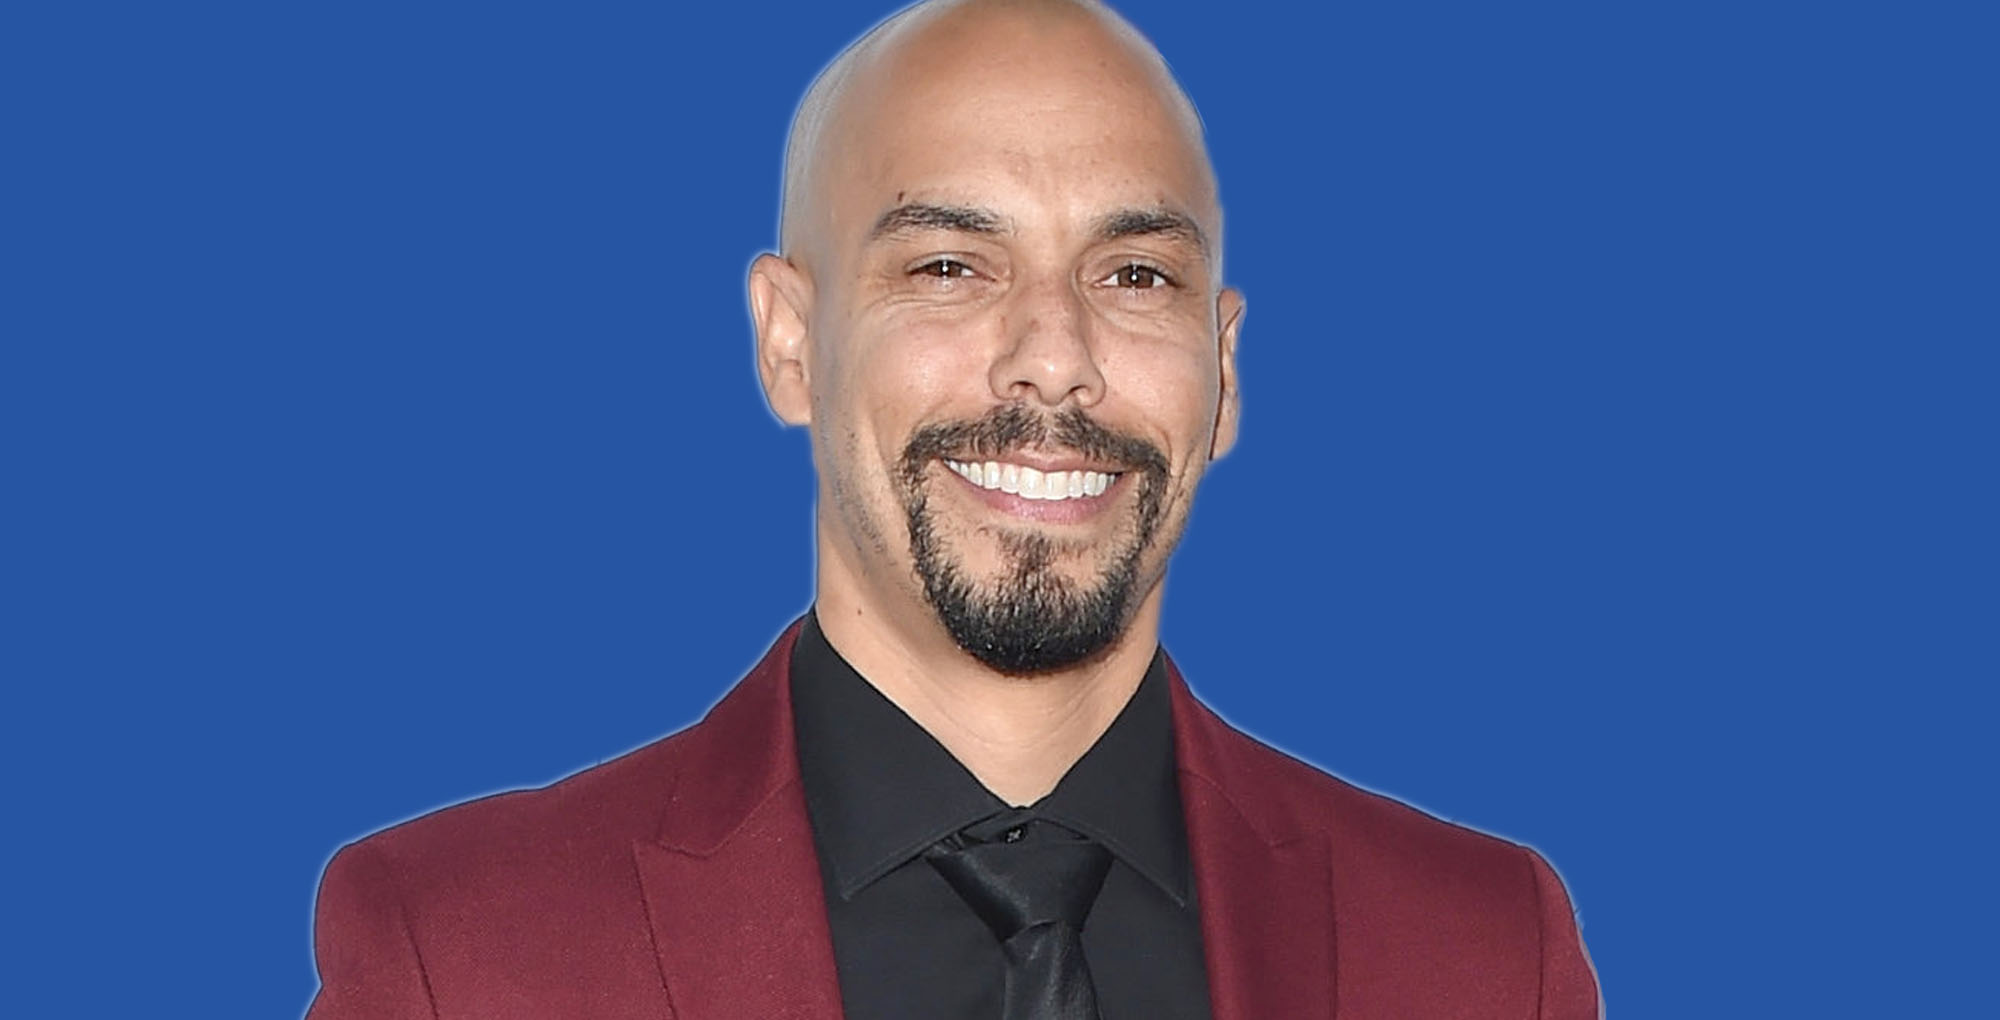 bryton james has big dream for star wars character.